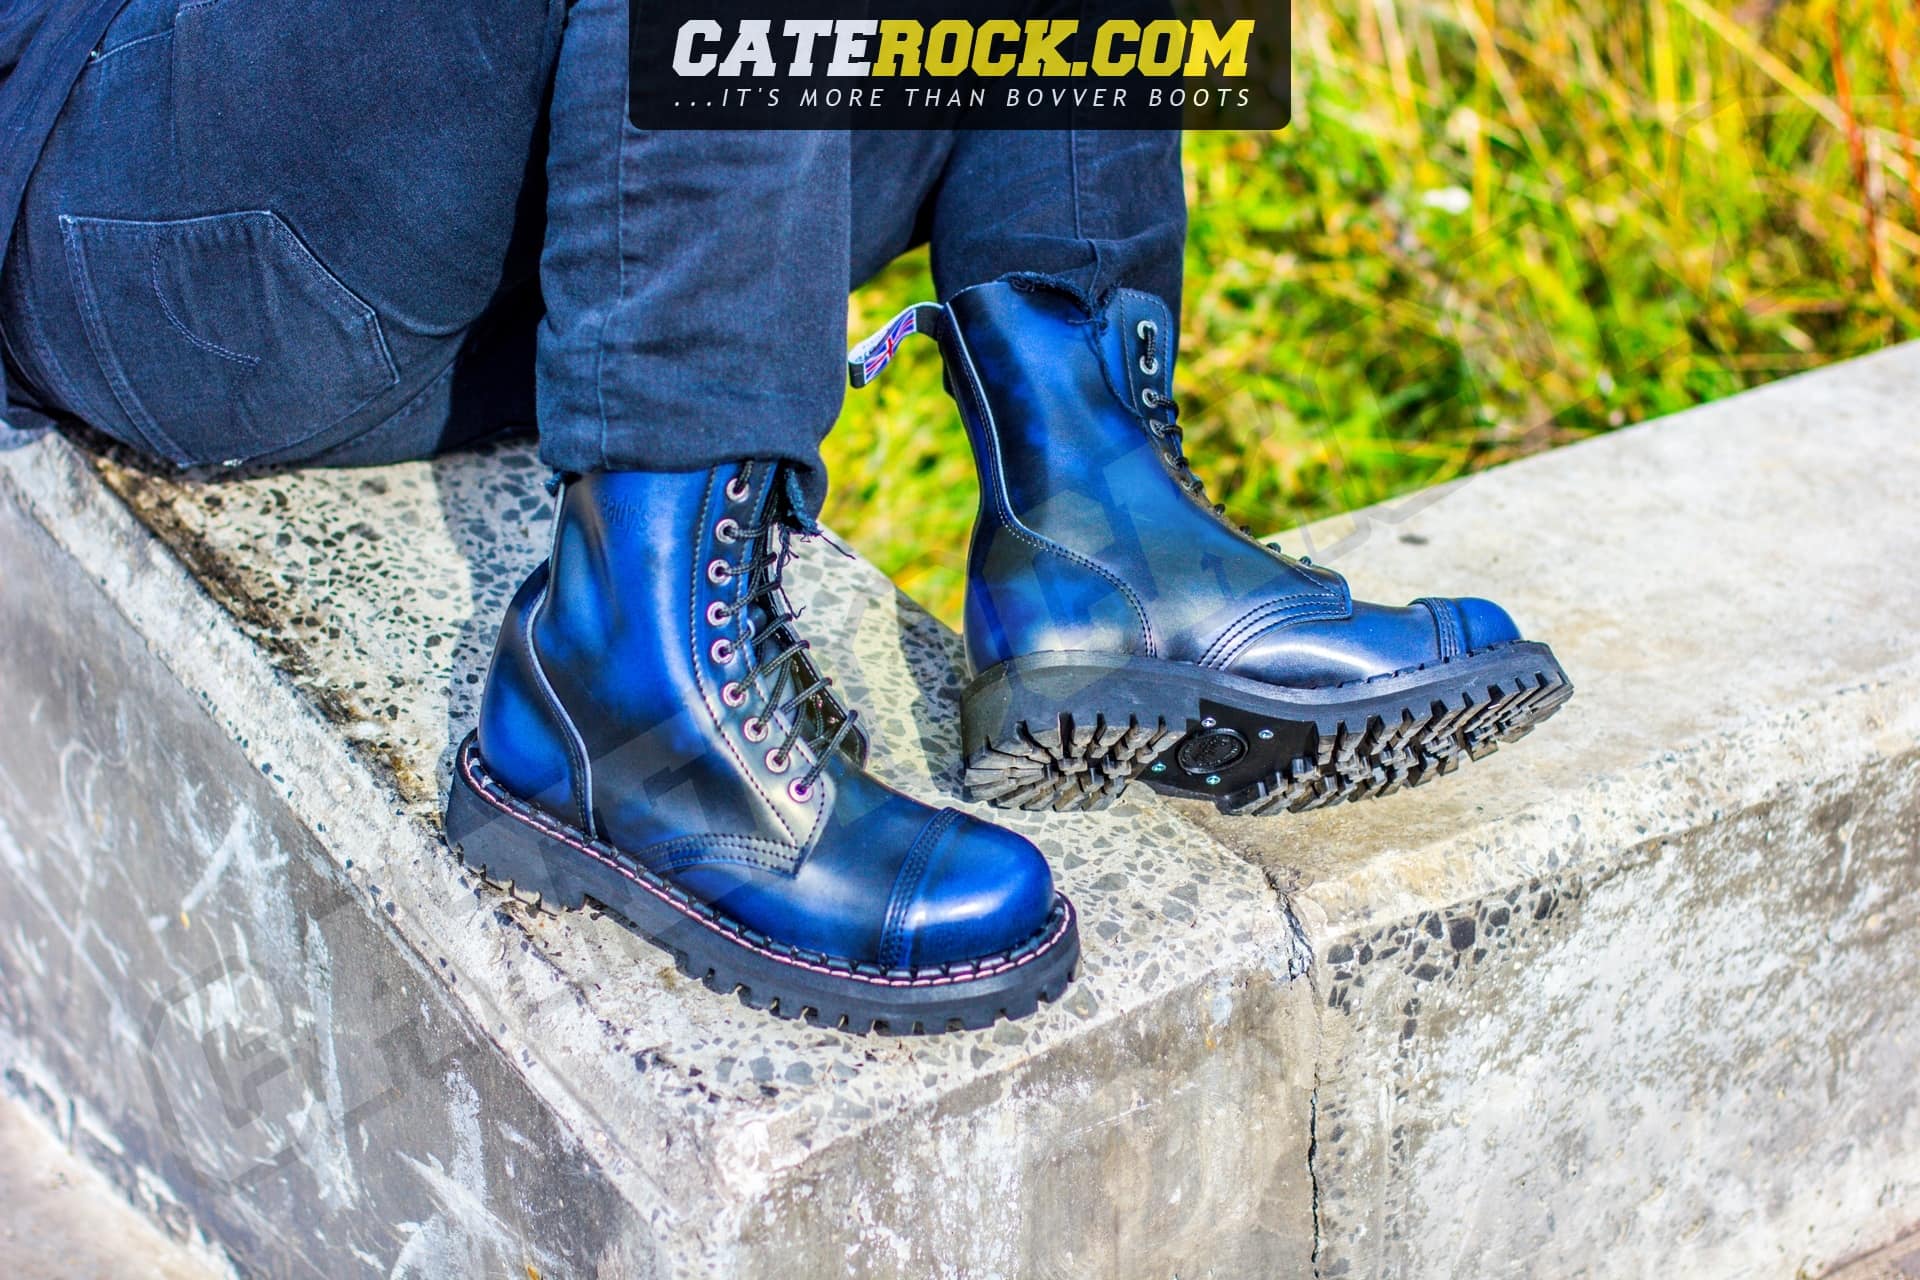 https://caterock.com/wp-content/uploads/2019/11/bovver-boots-10-eyelet-wiped-to-blue-B.jpg